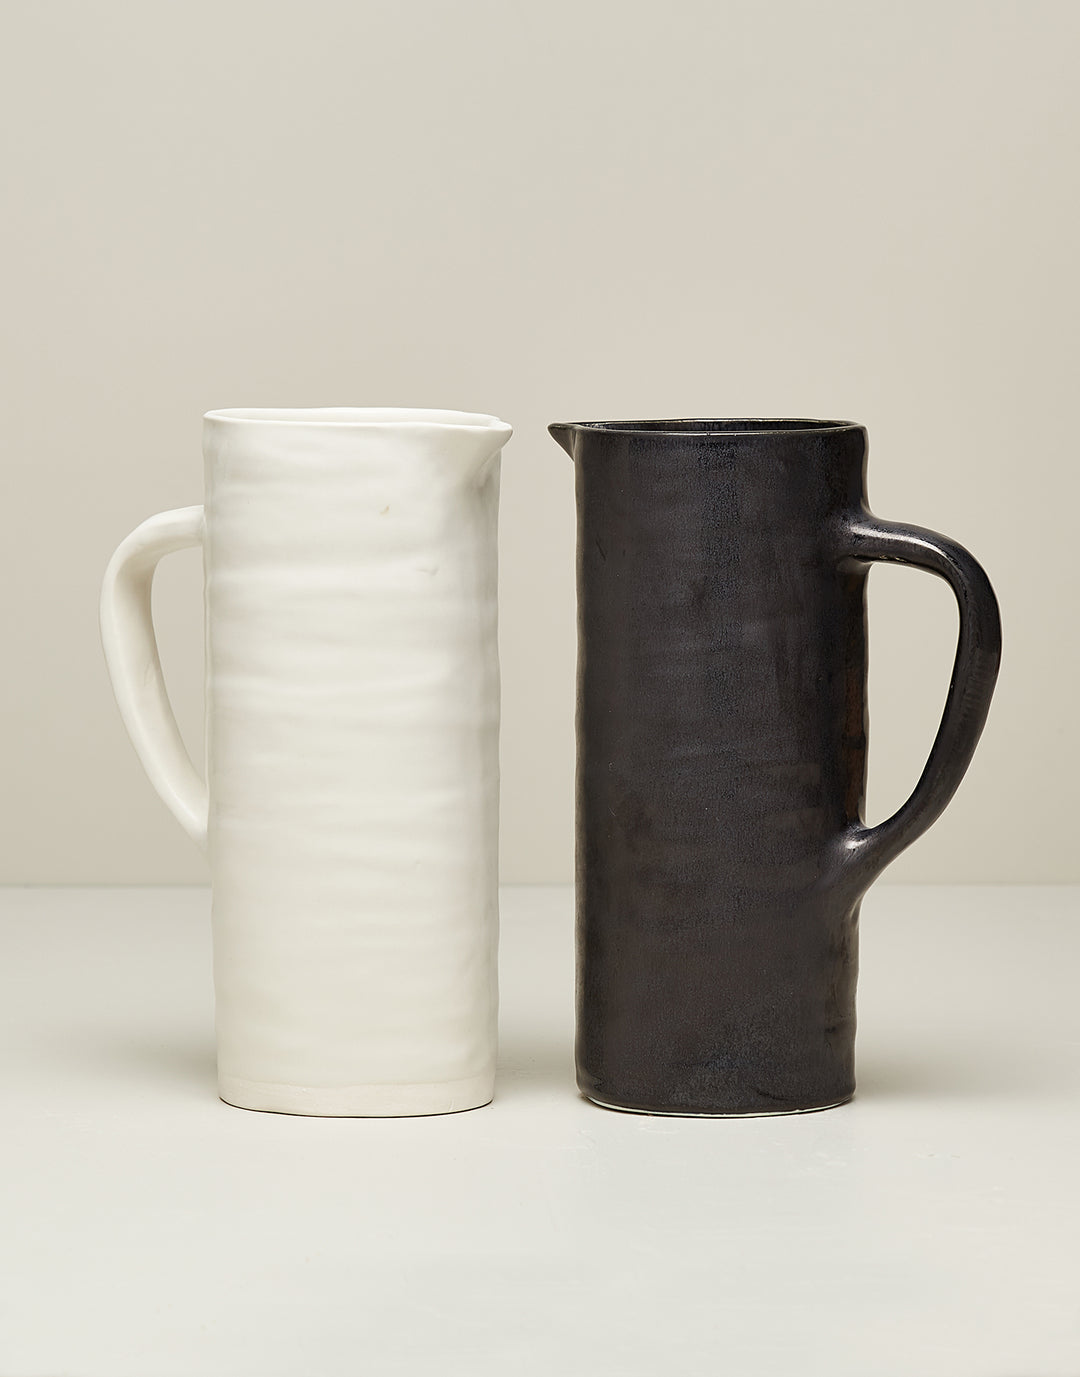 [READY TO SHIP] Bare Pitcher